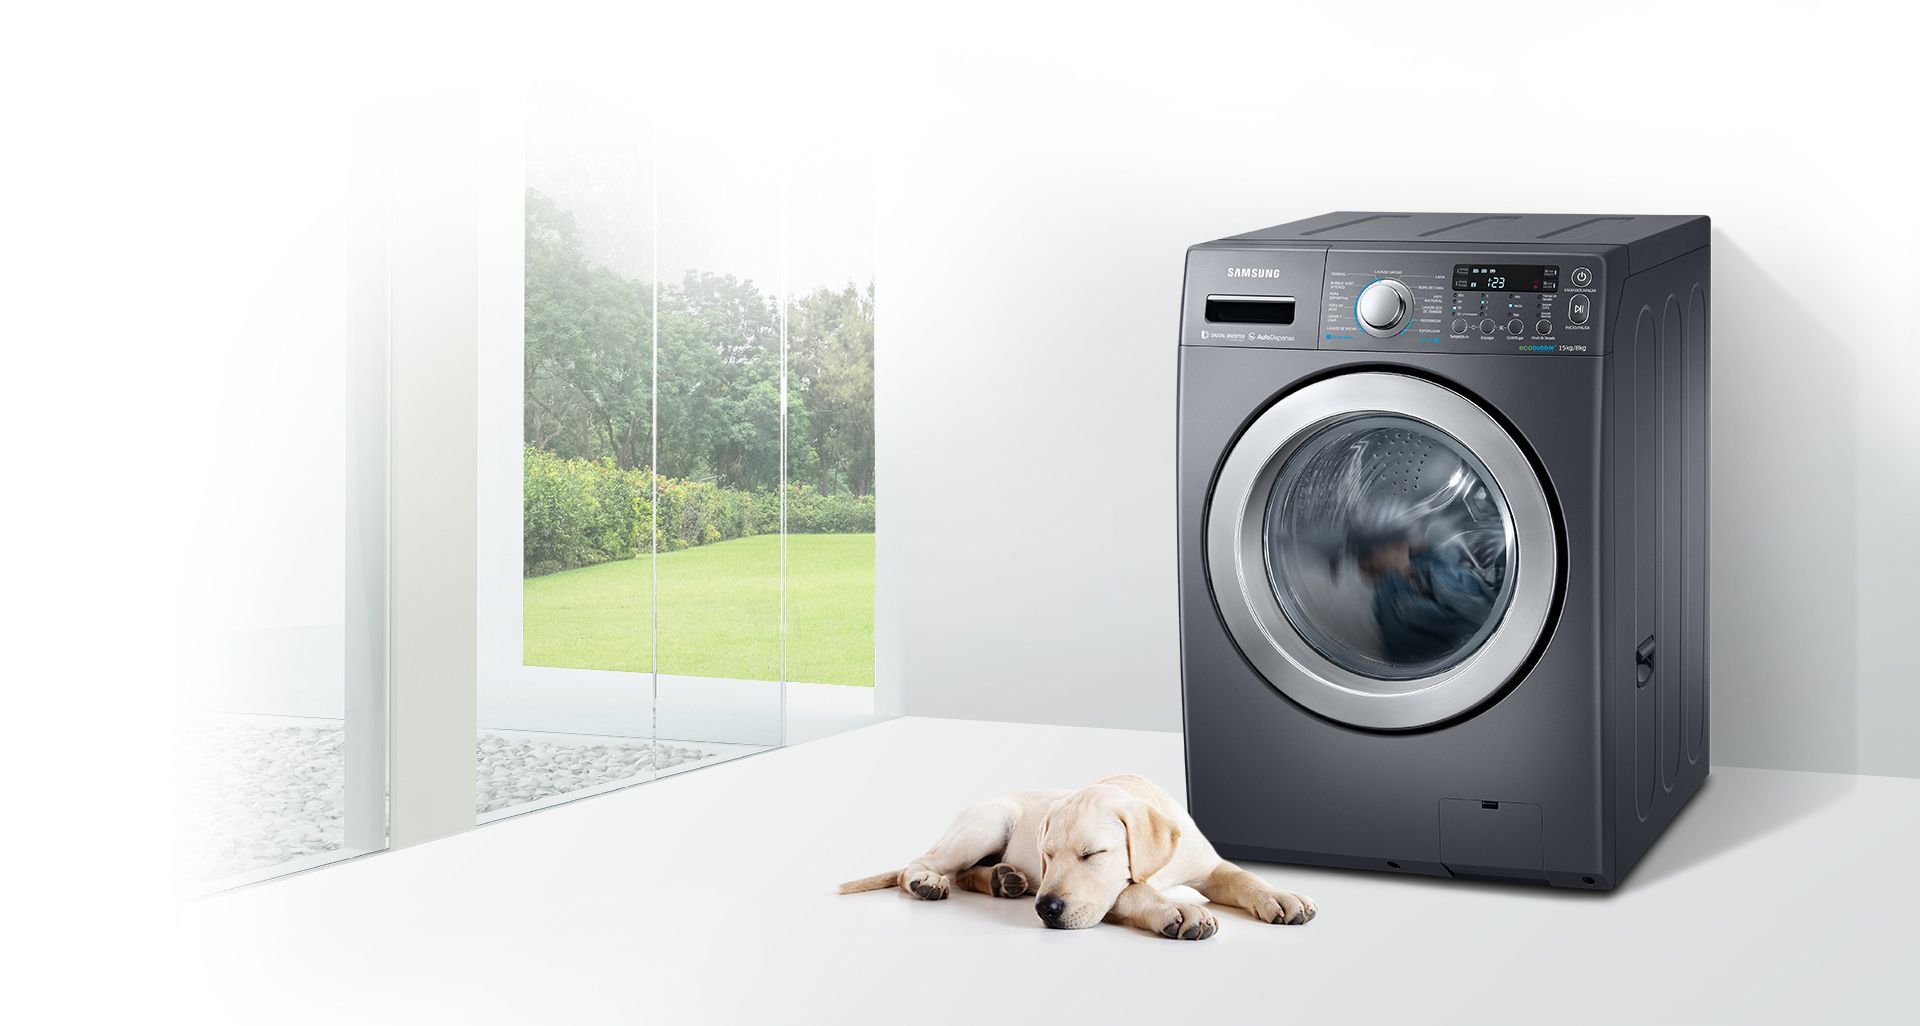 Our Best List Of 5 Semi-Automatic Washing Machines